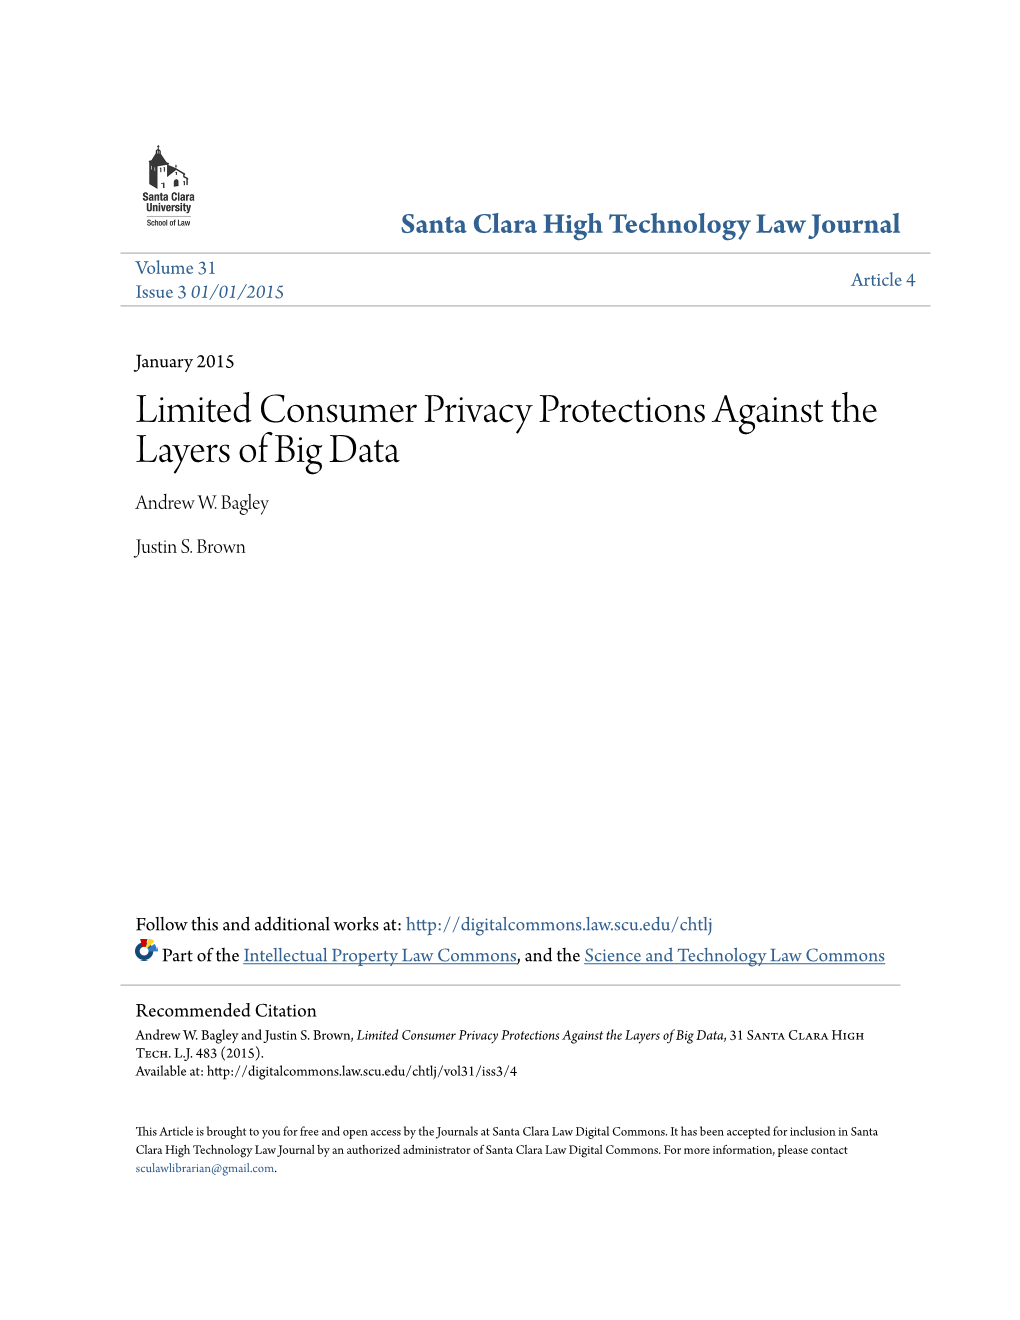 Limited Consumer Privacy Protections Against the Layers of Big Data Andrew W